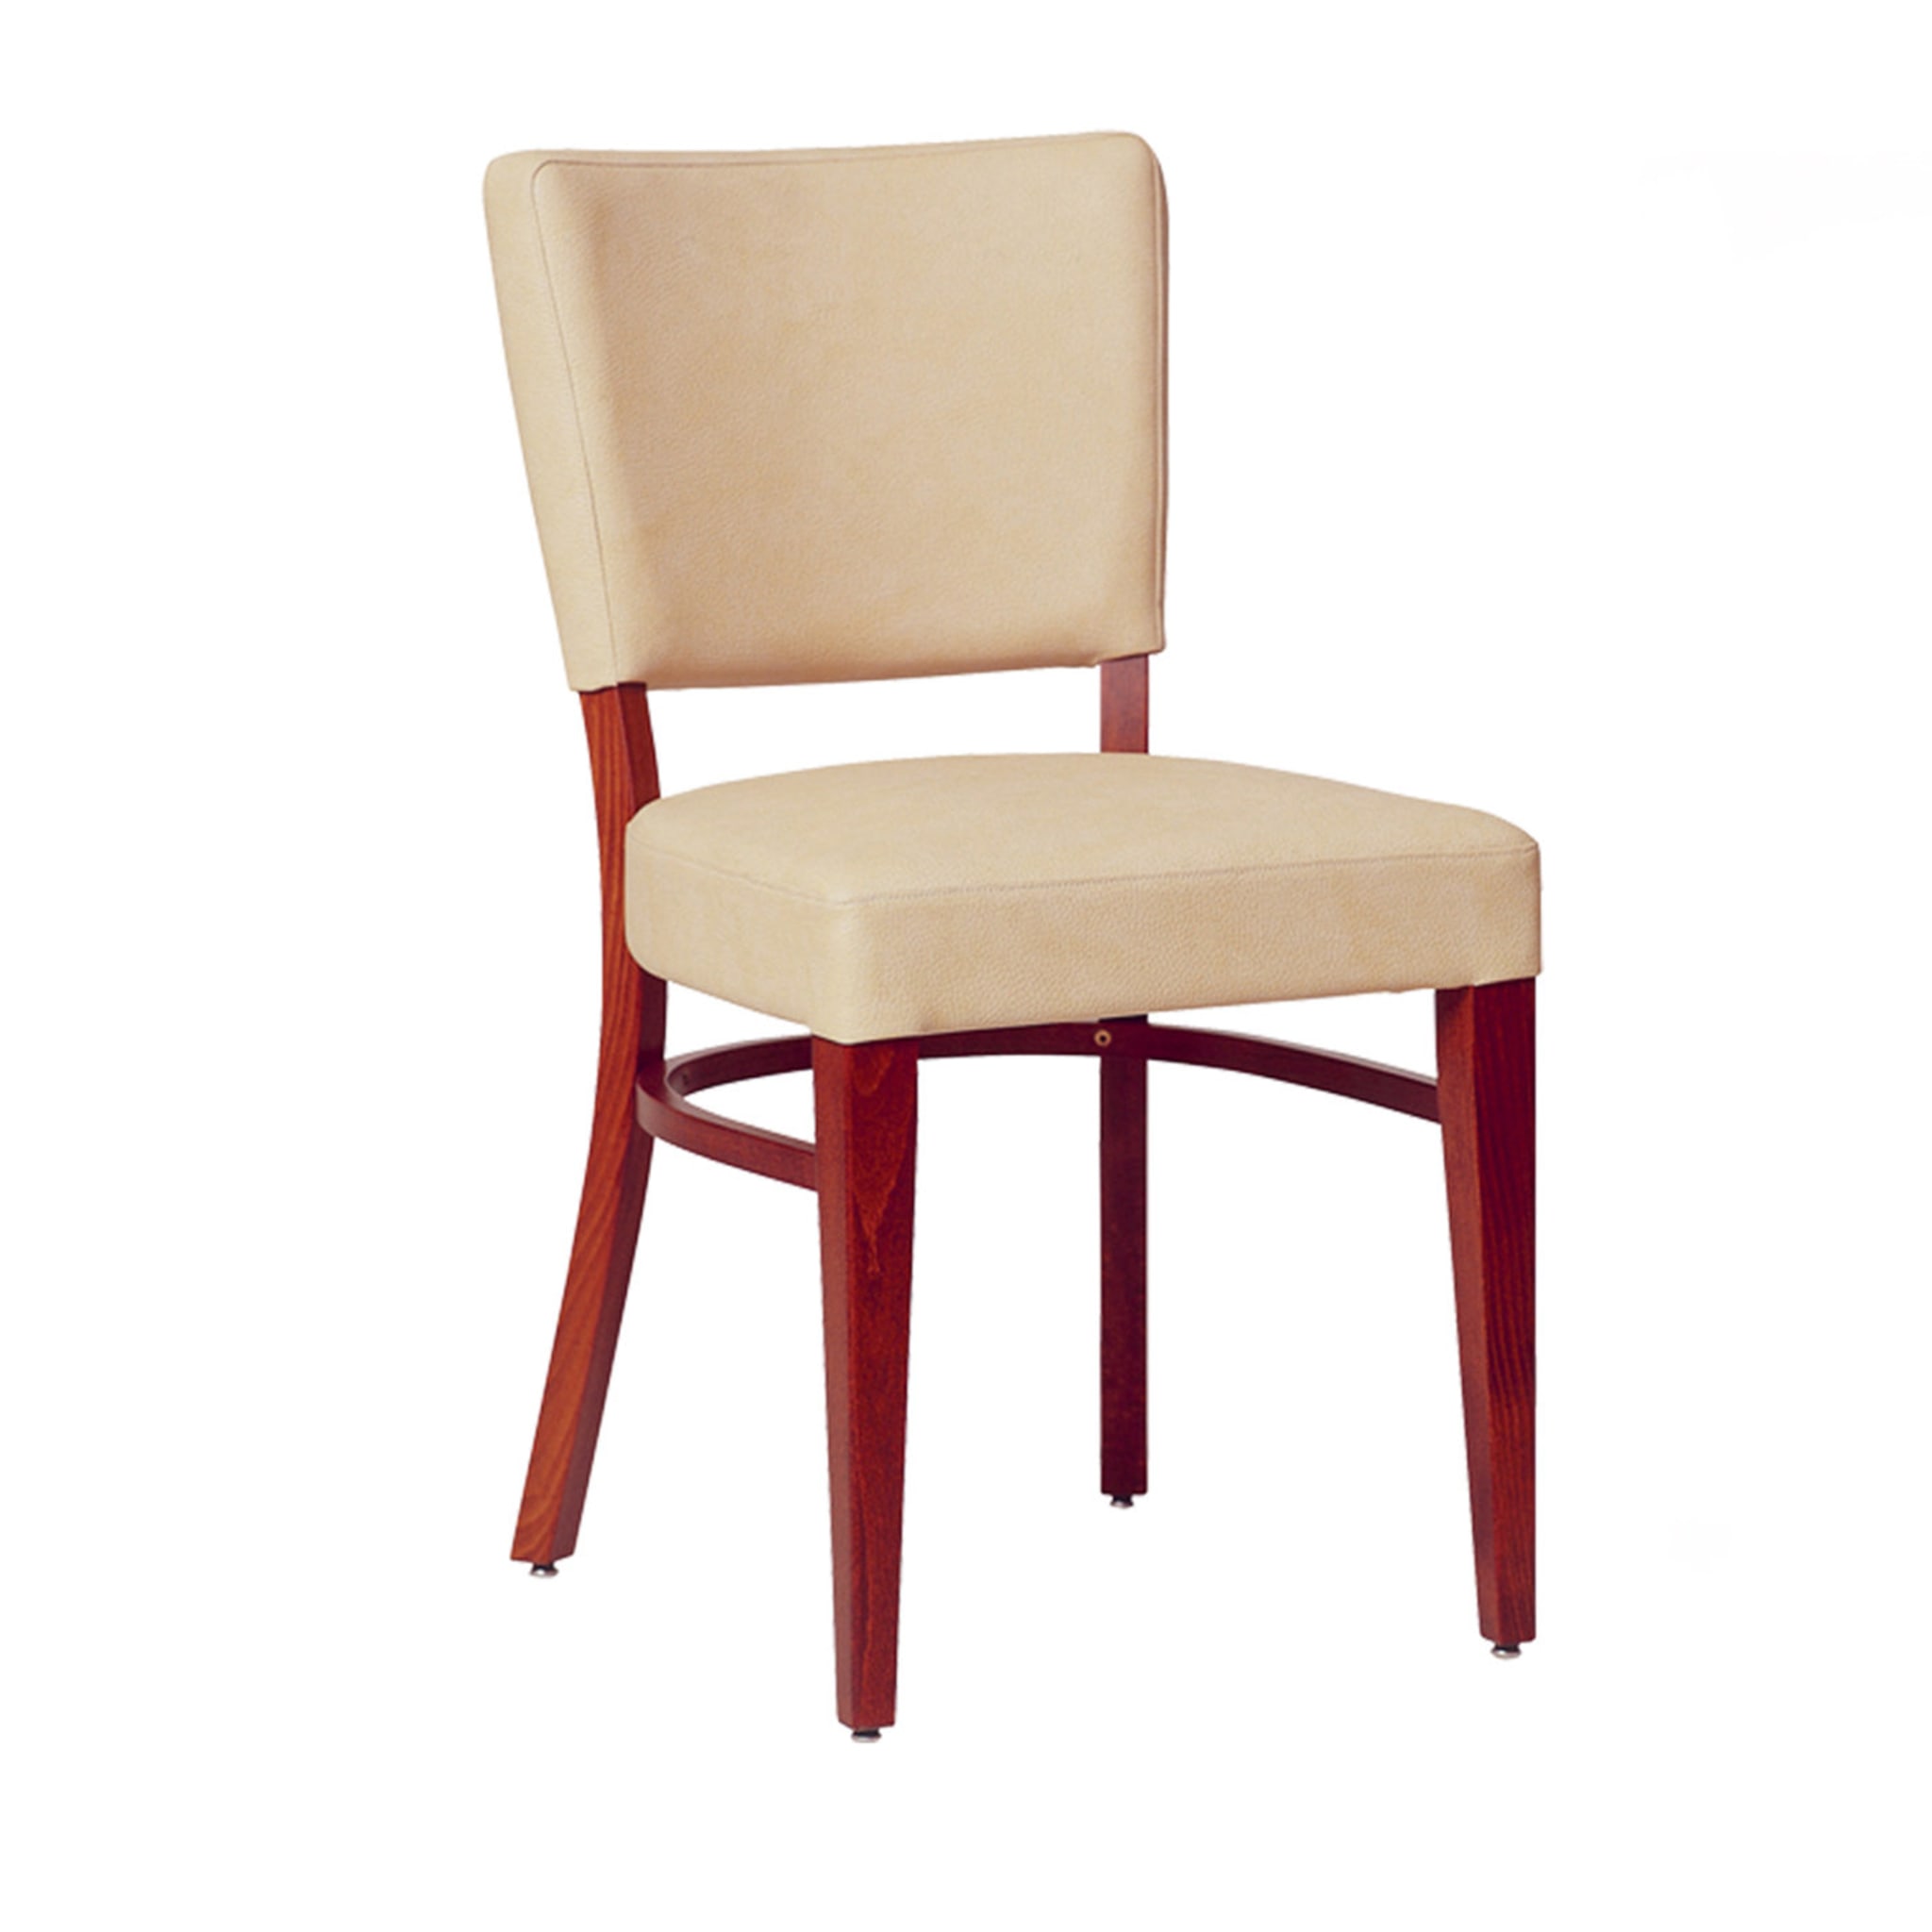 Marsiglia Set of 2 Red and Beige Chairs - Main view